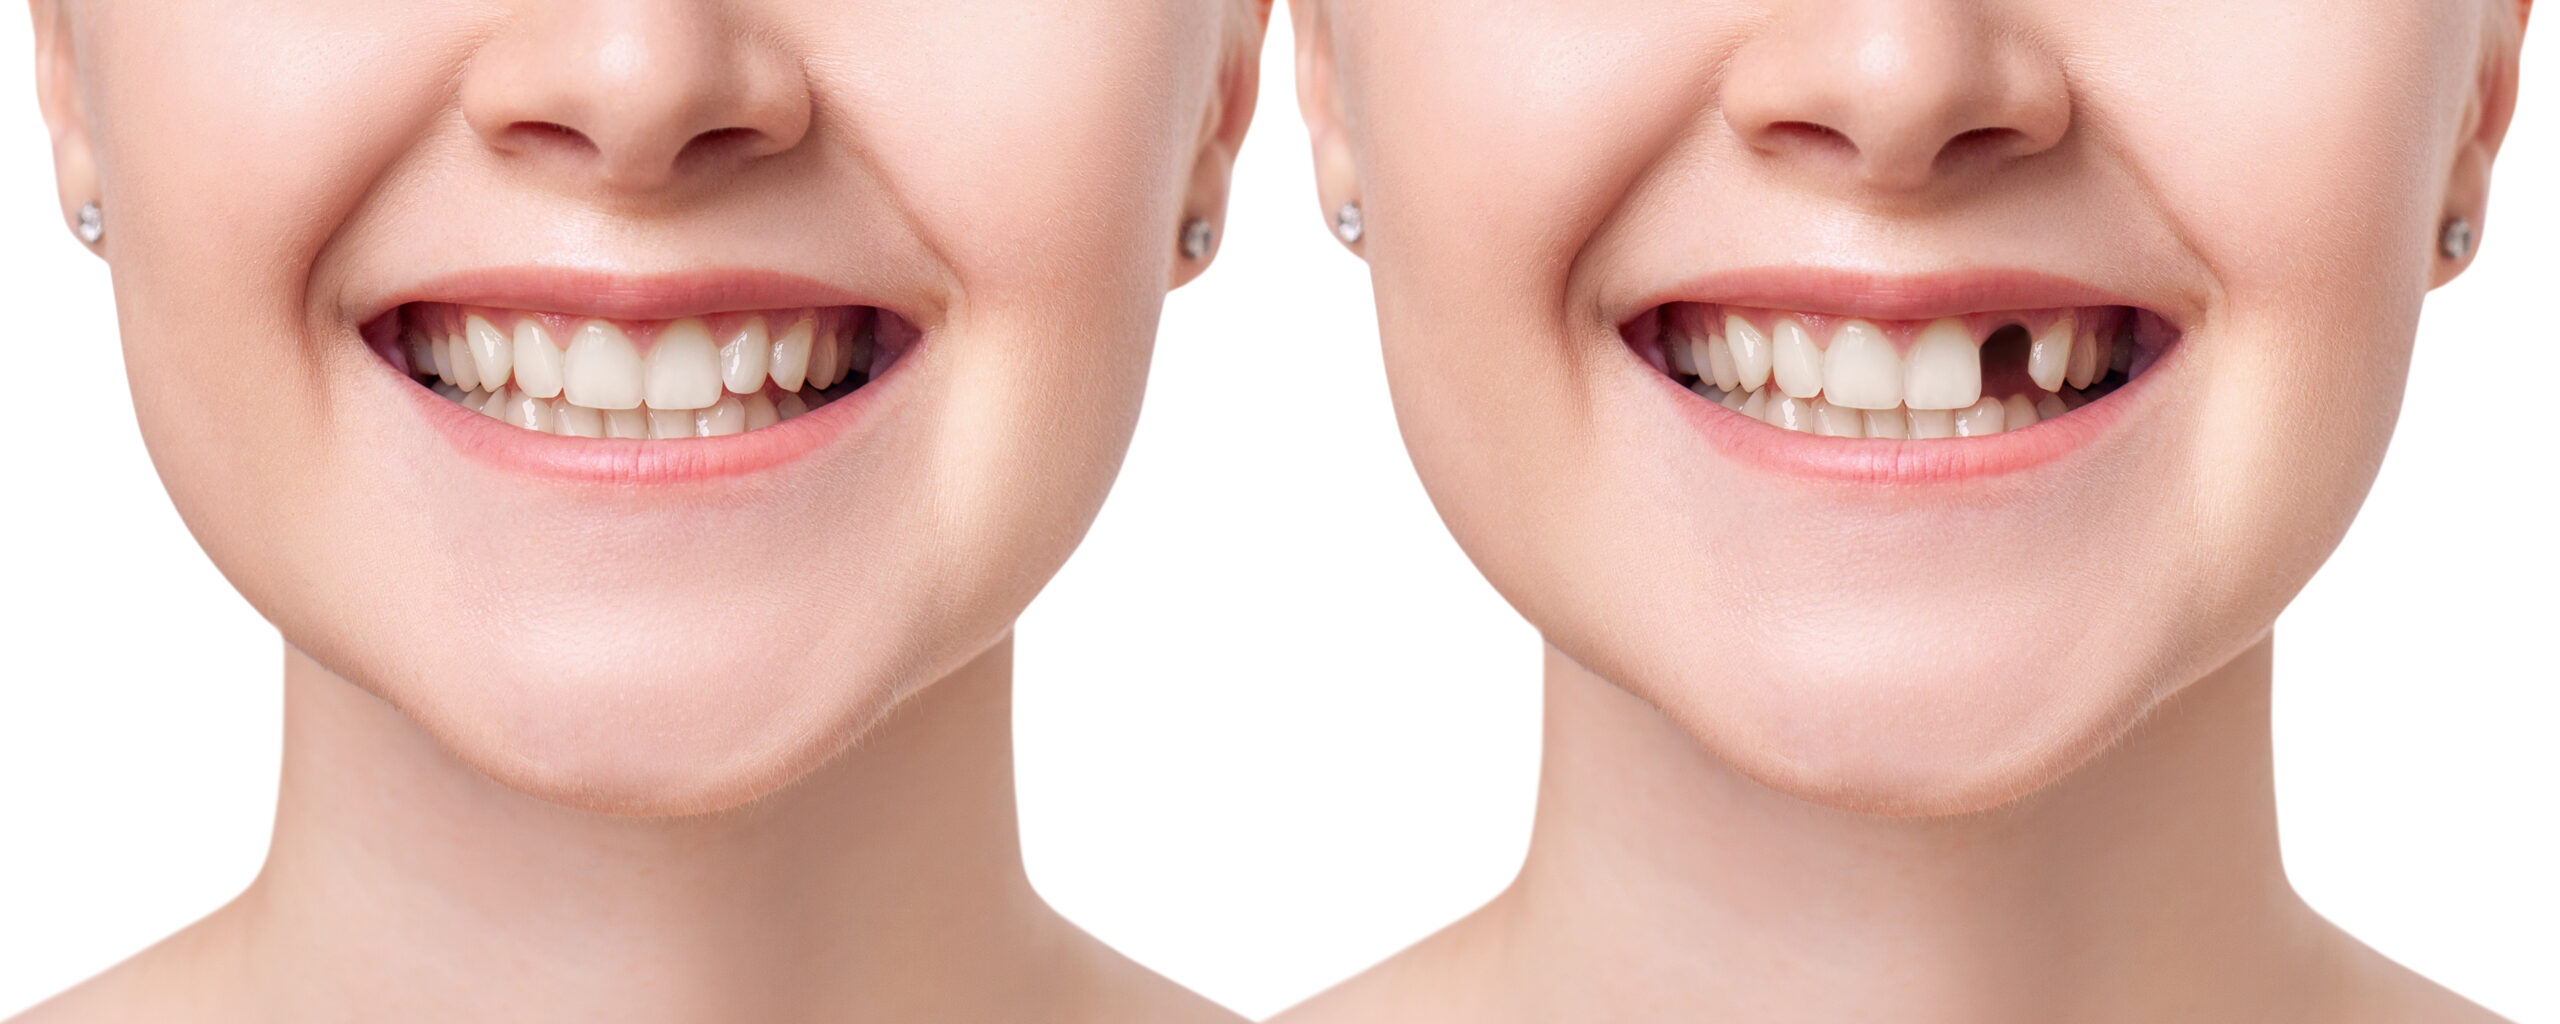 ung woman smiling before and after dental implant. Isolated on white background.